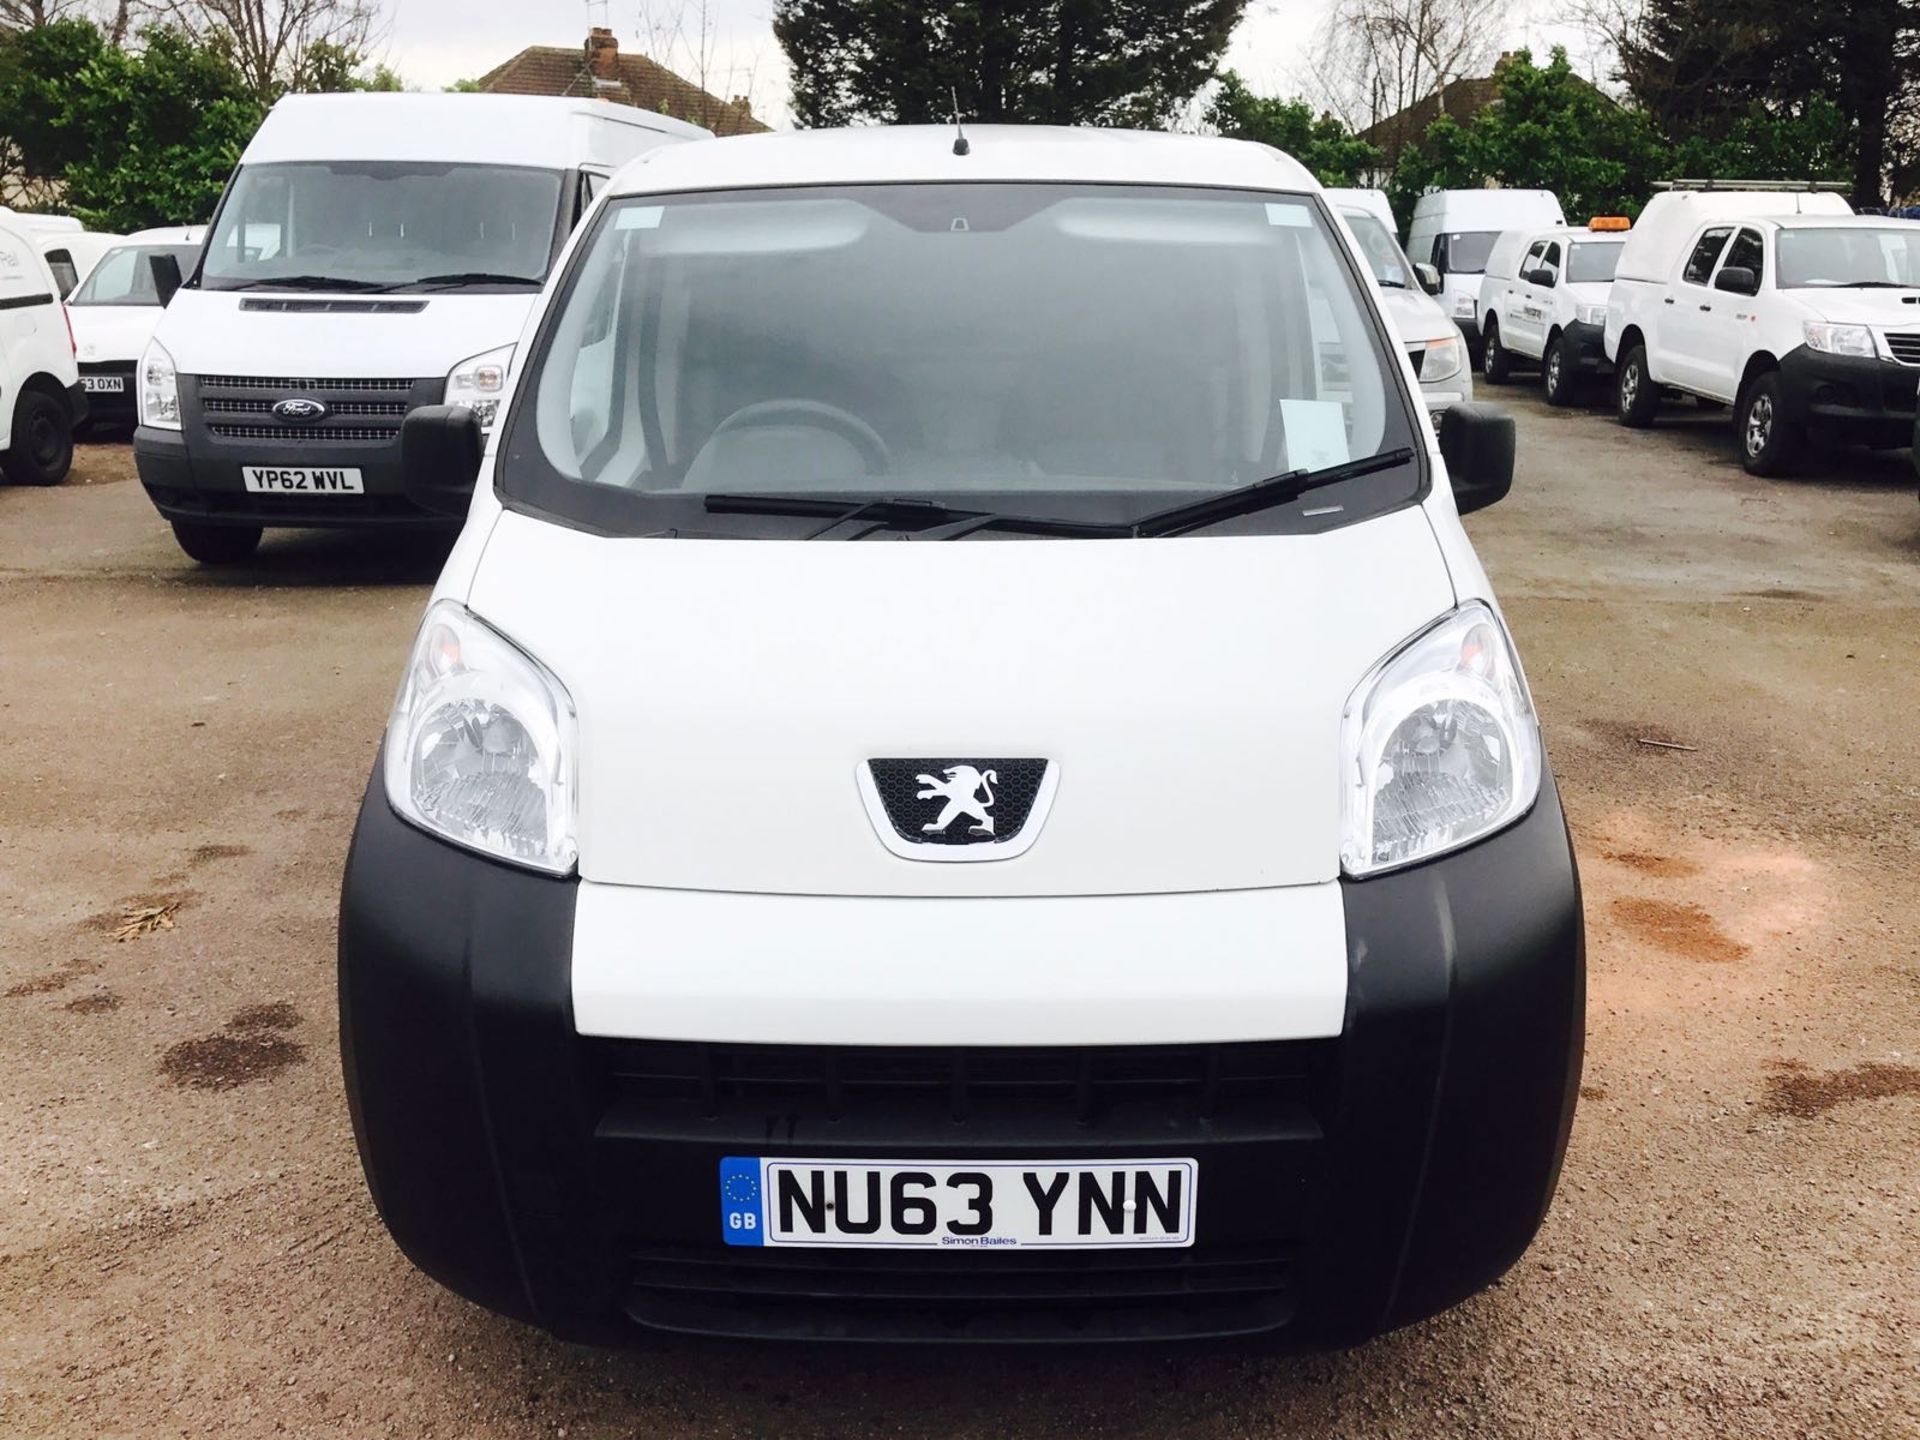 ON SALE PEUGEOT BIPPER 1.3HDI "PLUS PACK" - 2014 MODEL - 1 OWNER - AIR CON - BLUETOOTH - LOW MILES!! - Image 8 of 18